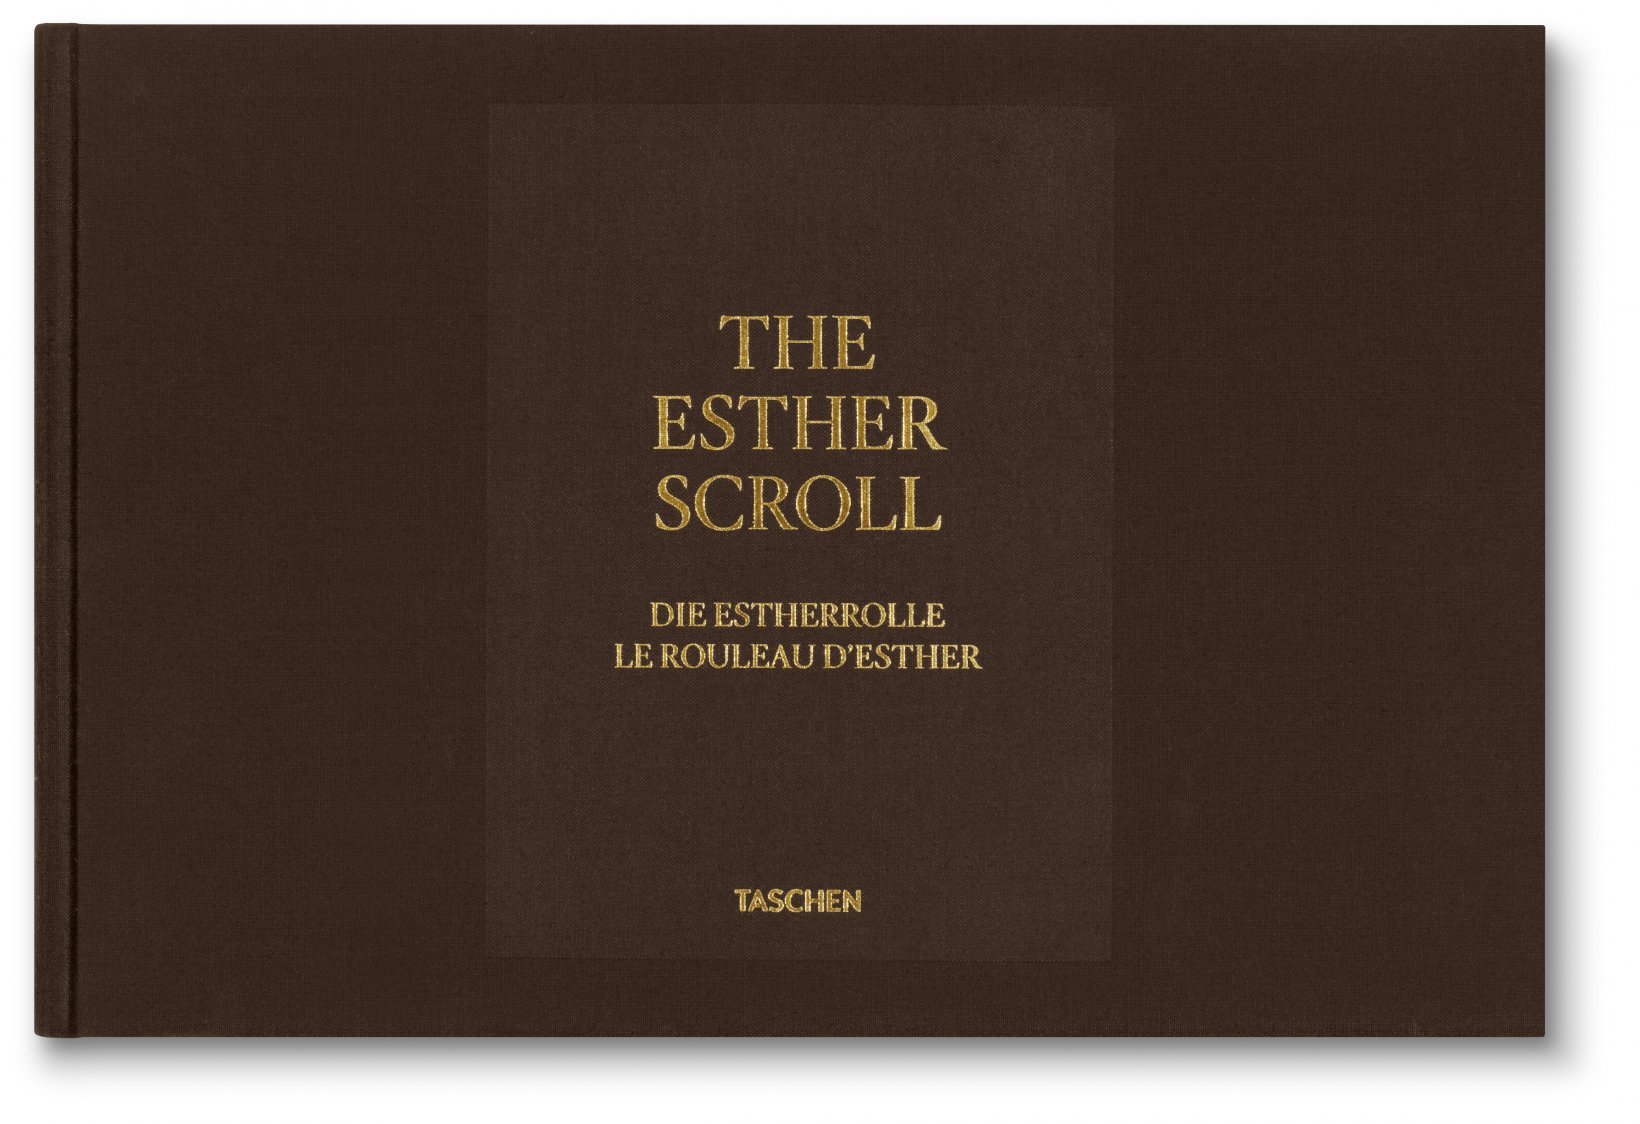 The Esther Scroll LIMITED EDITION 1746 WORLDWIDE Taschen 